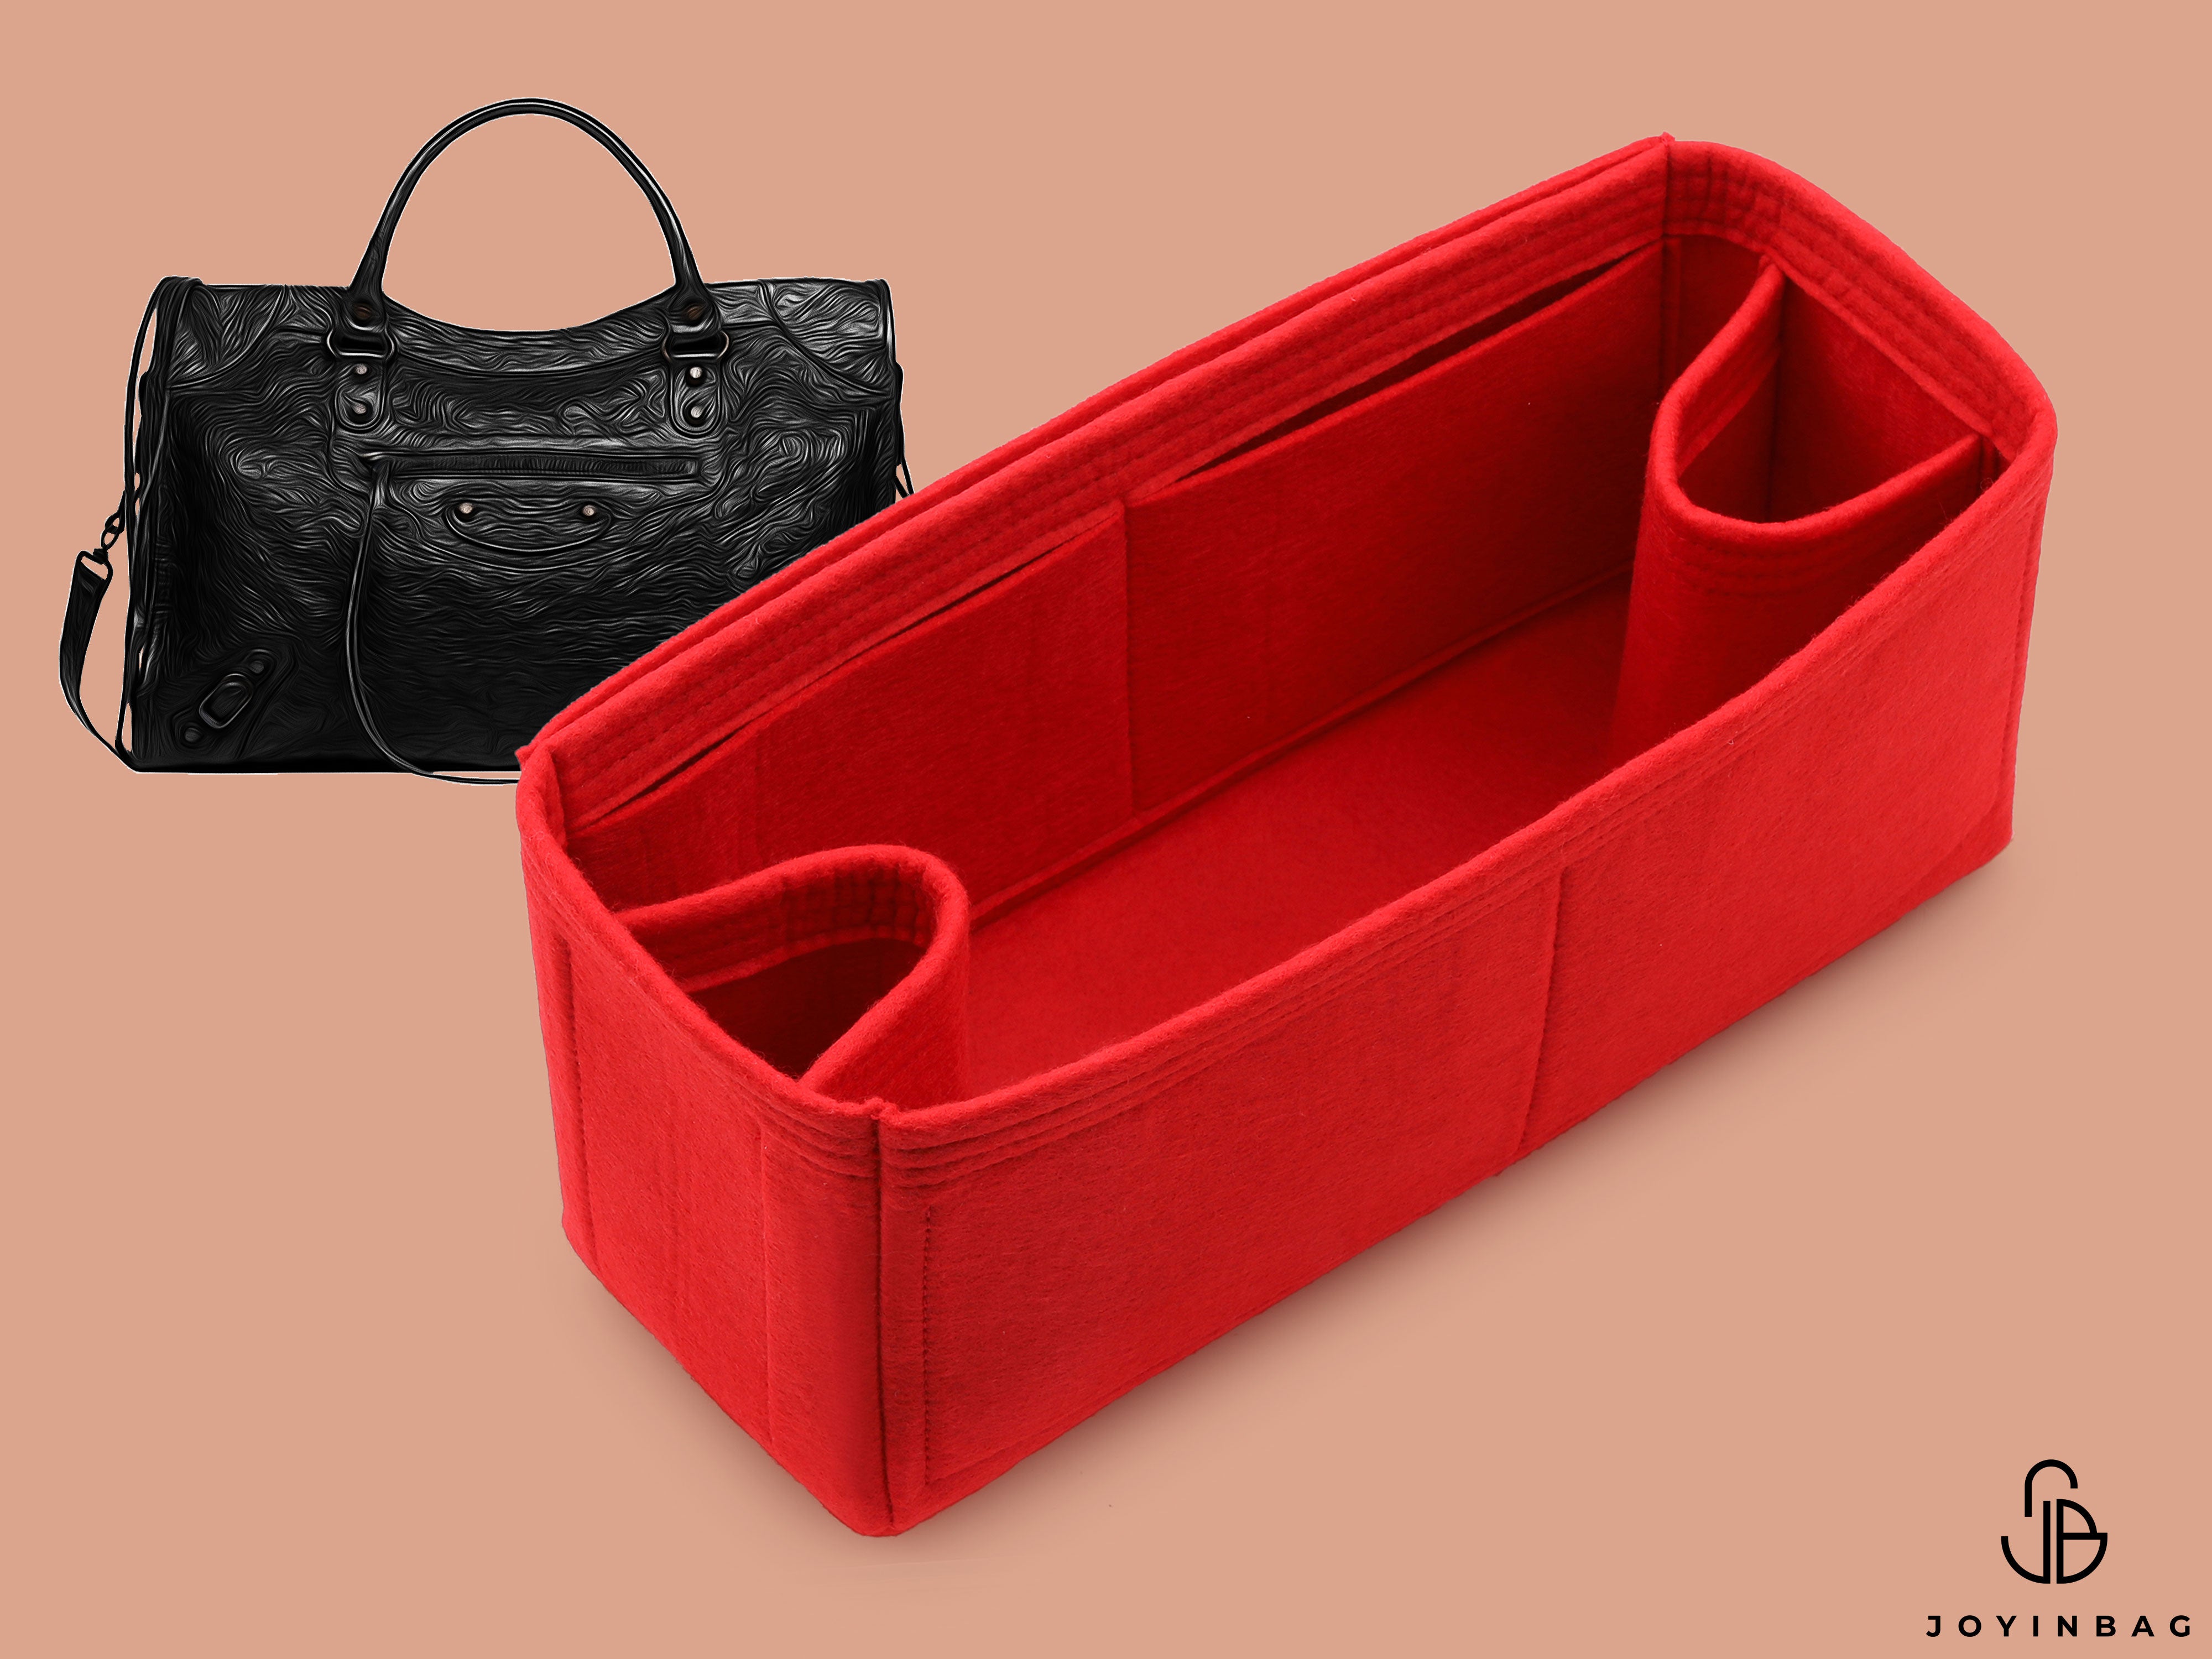 Bag and Purse Organizer with Basic Style for Alma Models